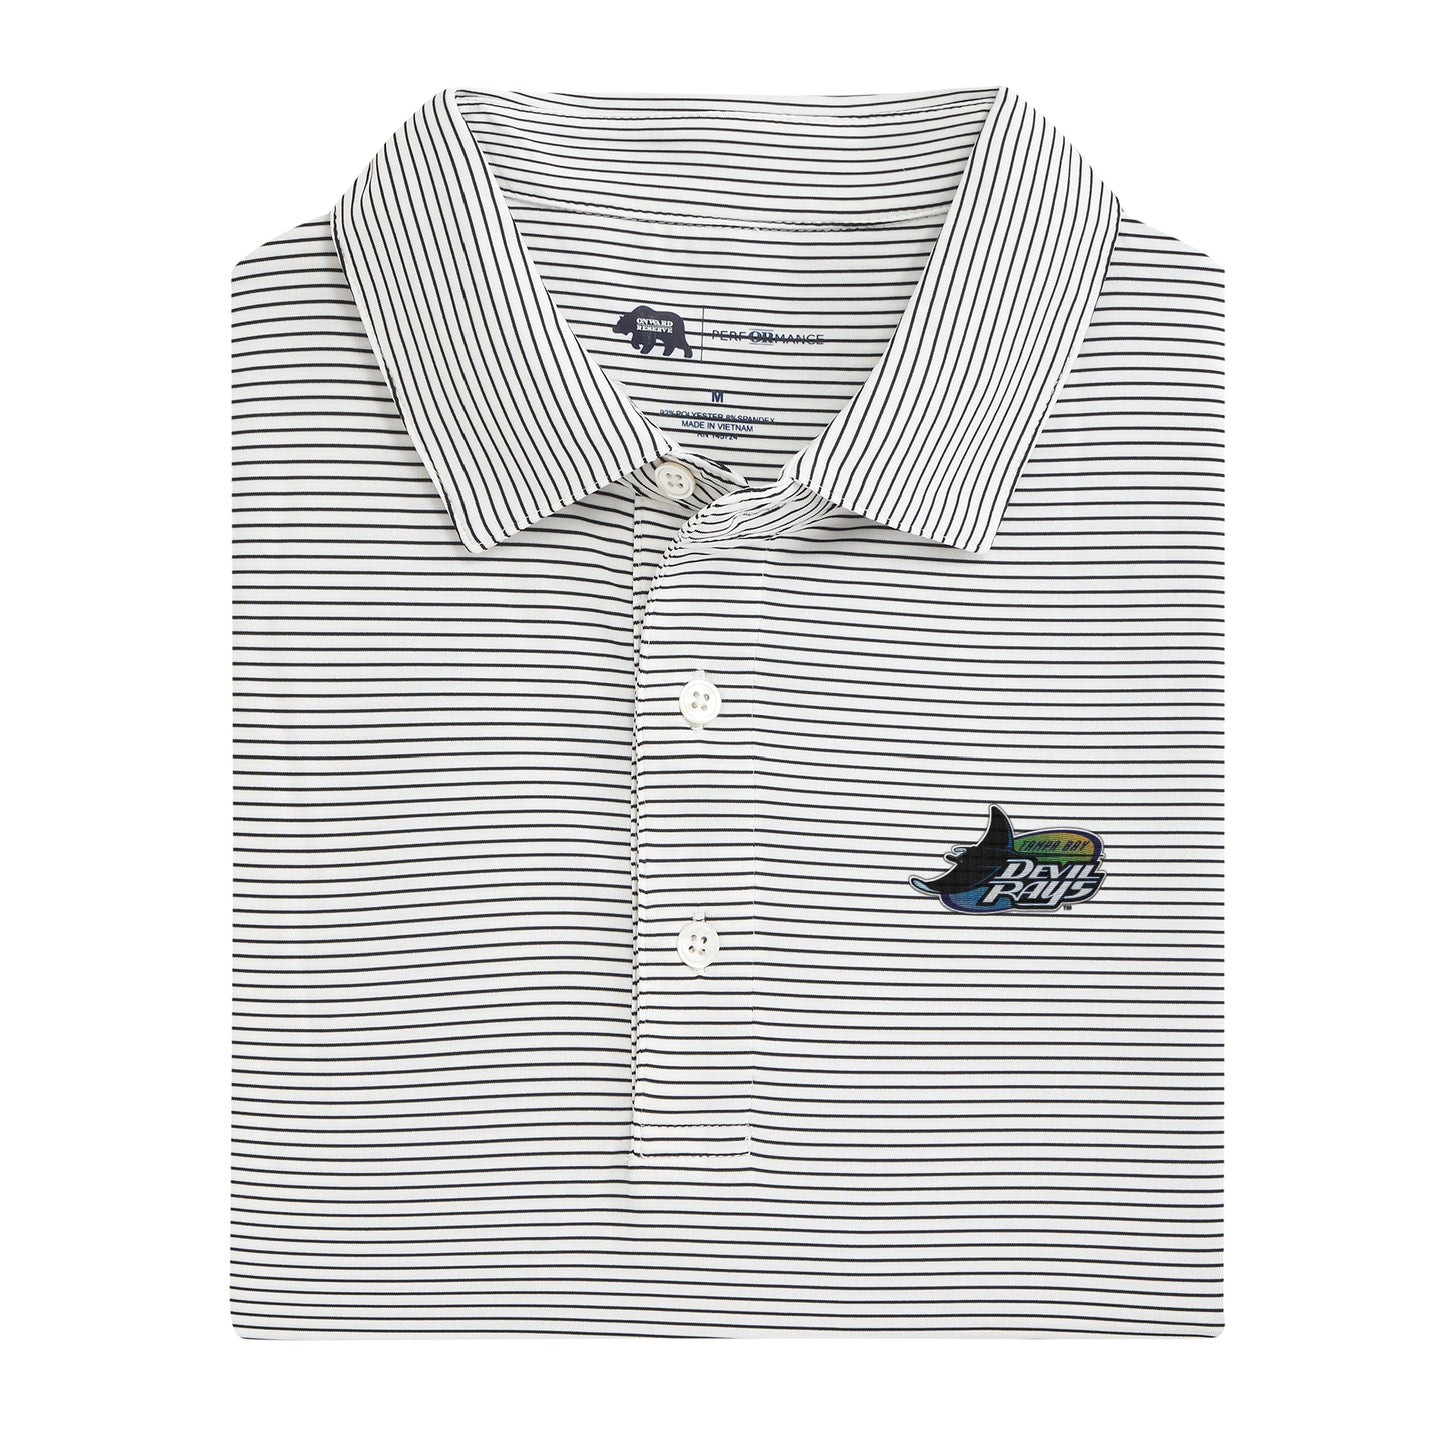 Tampa Bay Rays Cooperstown Birdie Stripe Performance Polo